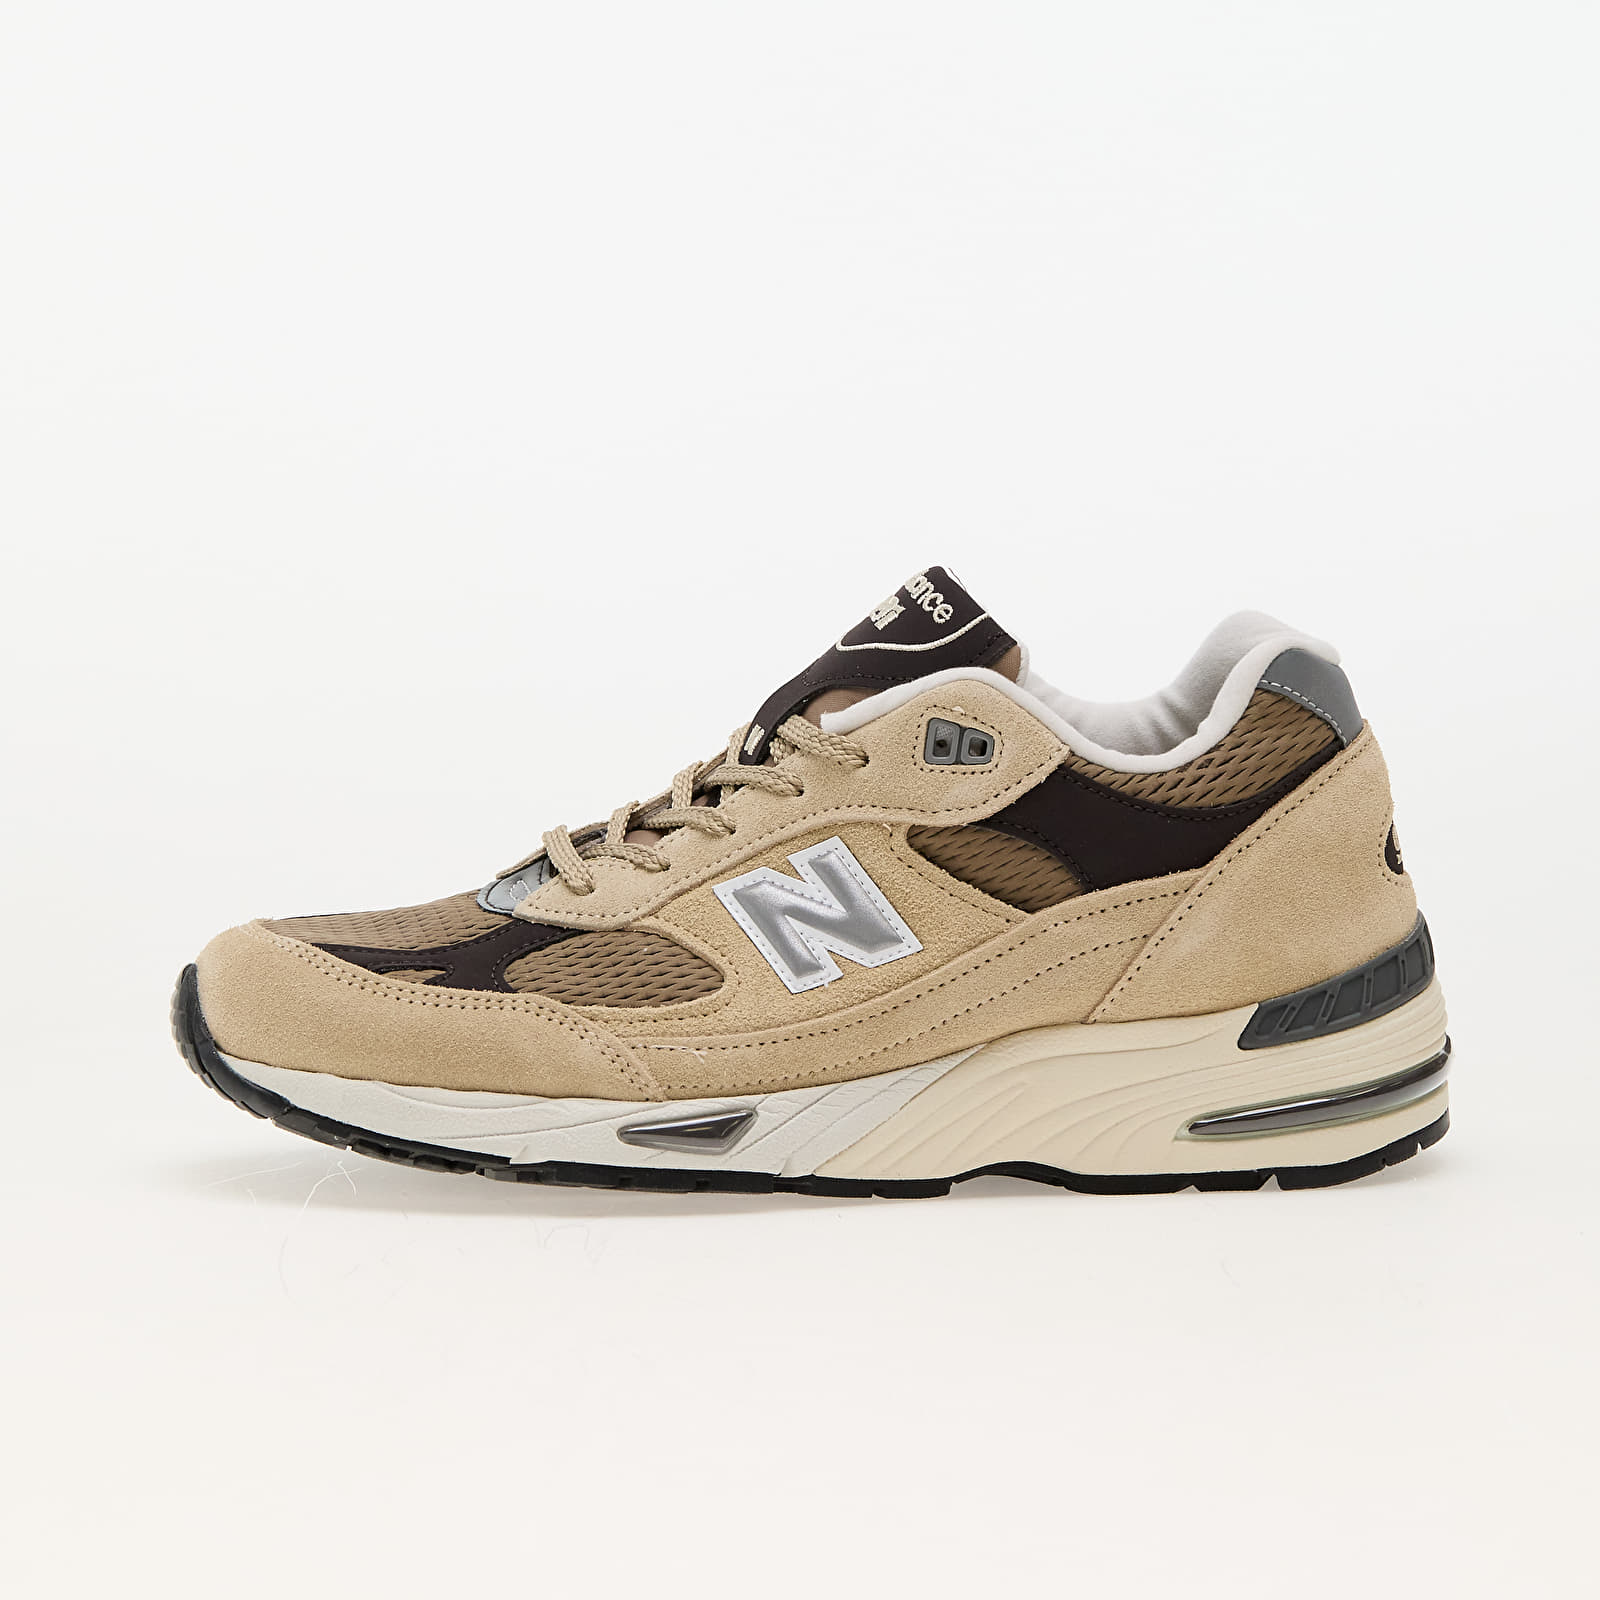 Chaussures et baskets homme New Balance 991 Made in UK Beige